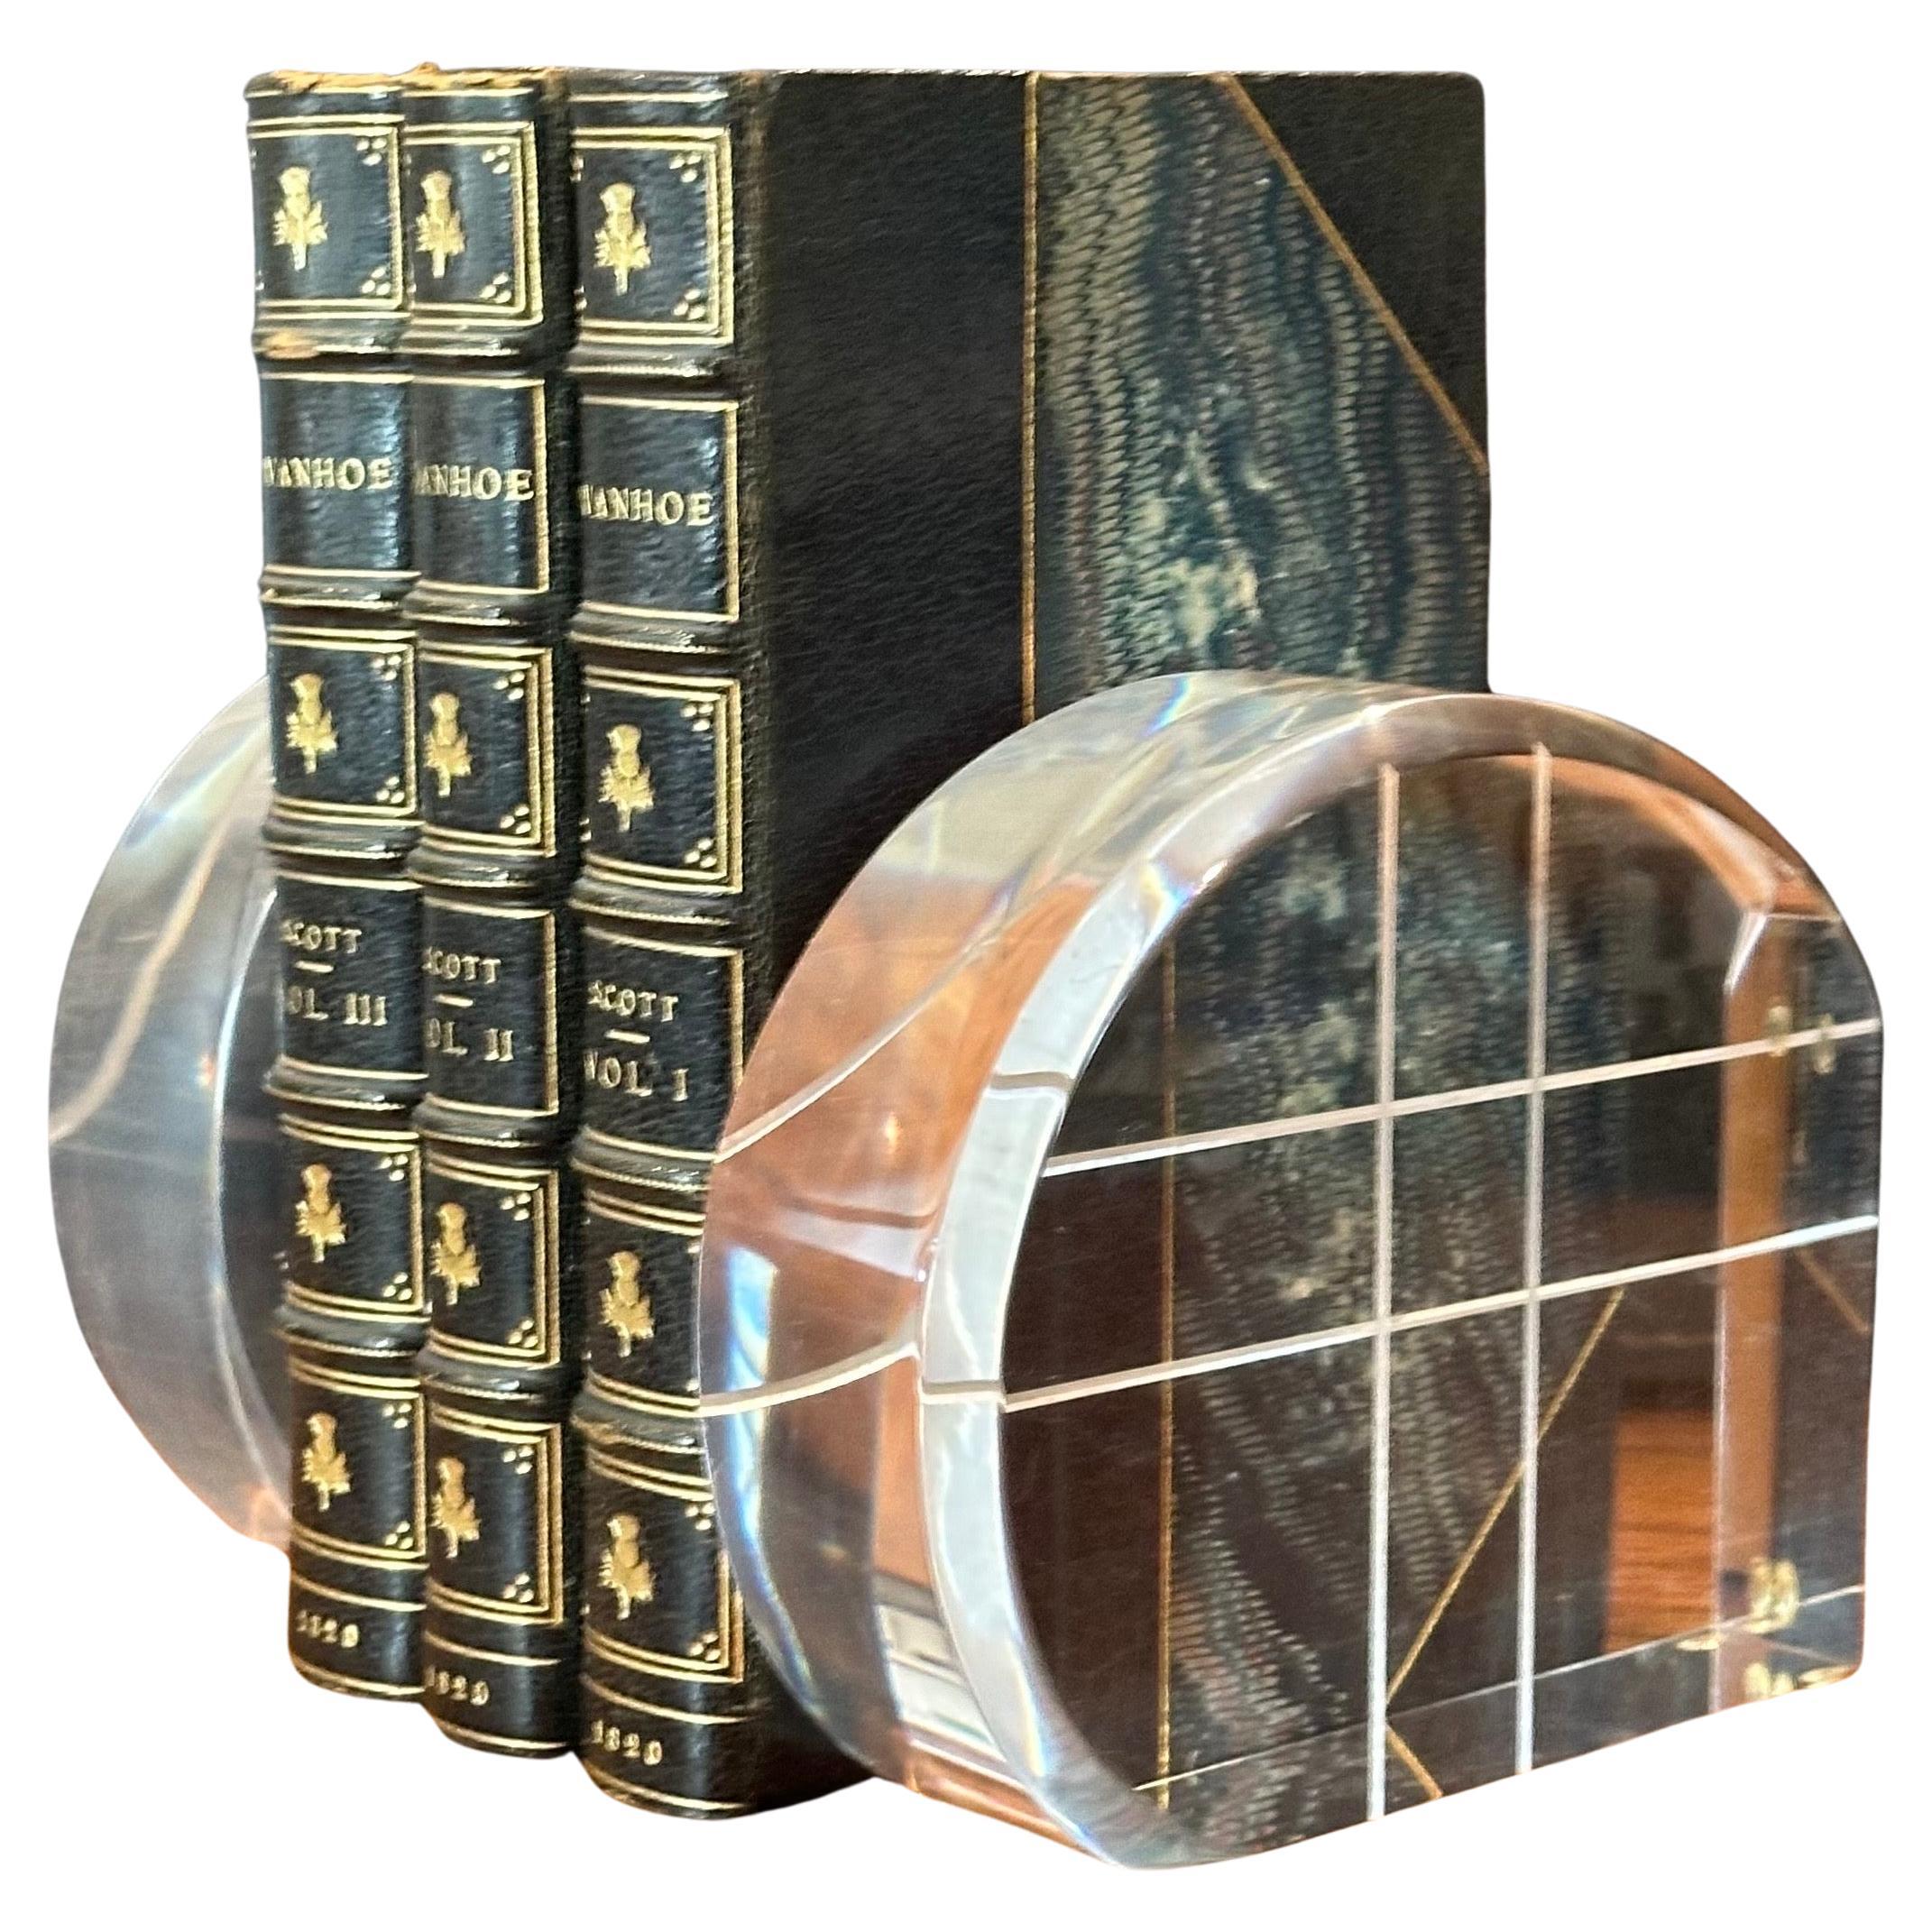  A nice pair of MCM arched lucite bookends in the Style of Herb Ritts for Astrolite, circa 1970s. The pair are in excellent condition and would make a great addition to any mid-century study or library! The measure a hefty 10